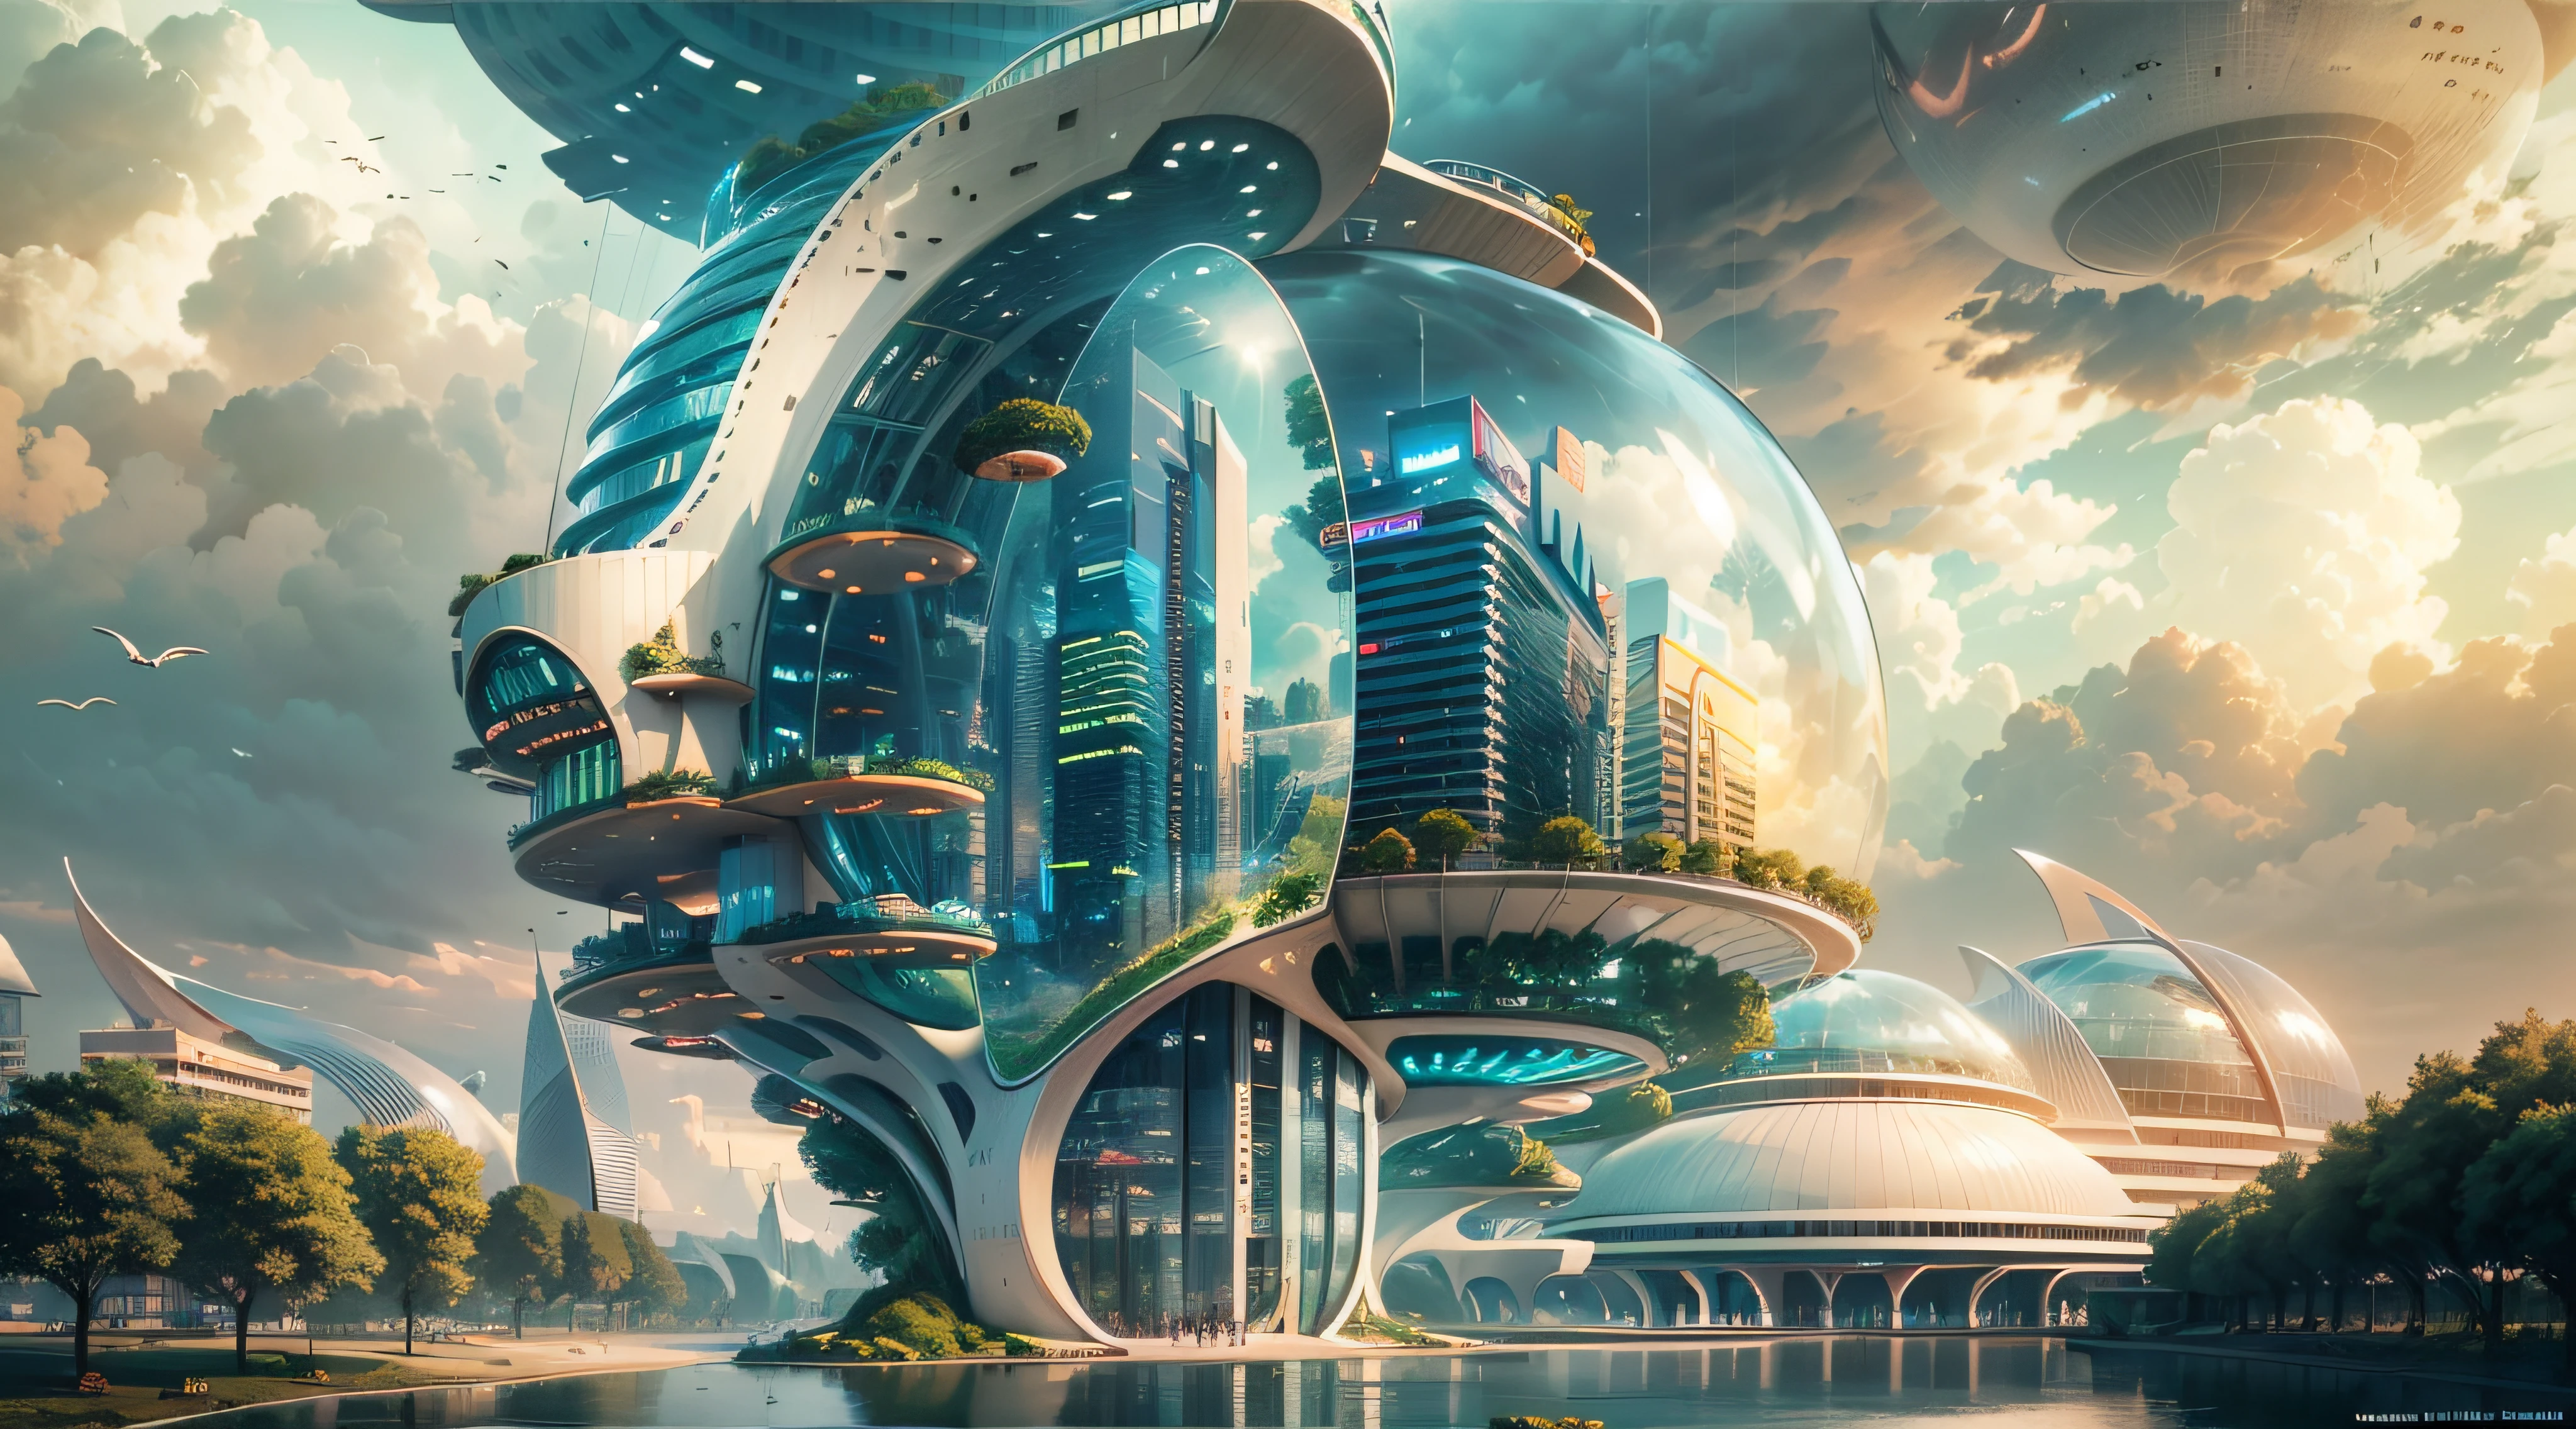 (Best quality,4K,8K,A high resolution,Masterpiece:1.2),Ultra-detailed,(Realistic,Photorealistic,photo-realistic:1.37),Futuristic floating city,Futuristic technology,Huge urban high-tech tablet platform,Airship,Floating in the sky,Futuristic city,Small airships around,High-tech hemispherical platform,Colorful lights,Advanced architecture,modernn architecture,skyscrapper,Access the cloud,Scenic beauty,view over city,Impressive design,Blend seamlessly with nature,energetic and vibrant atmosphere,Futuristic transportation system,Parking is suspended,Transparent path,Lush greenery,Sky gardens,cascading waterfalls,Magnificent skyline,reflections on the water,Sparkling river,Architectural innovation,futuristic skyscrapers,Transparent dome,The shape of the building is unusual,Elevated walkway,Impressive skyline,Glowing lights,Futuristic technology,Minimalist design,Scenic spots,Panoramic view,Cloud Piercing Tower,Vibrant colors,epic sunrise,epic sunset,Dazzling light display,magical ambiance,The future city,Urban Utopia,LuxuryLifestyle,Innovative energy,sustainable development,Smart city technology,Advanced infrastructure,Tranquil atmosphere,Nature and technology live in harmony,Awesome cityscape,Unprecedented urban planning,Architecture connects seamlessly with nature,High-tech metropolis,A cutting-edge engineering marvel,The future of urban living,Visionary architectural concept,Energy-efficient buildings,Harmony with the environment,A city floating above the clouds,Utopian dreams become reality,The possibilities are endless,State-of-the-art transportation network,Green energy integration,Innovative materials,Impressive holographic display,Advanced communication system,Breathtaking aerial view,Quiet and peaceful environment,Modernist aesthetics,Ethereal beauty